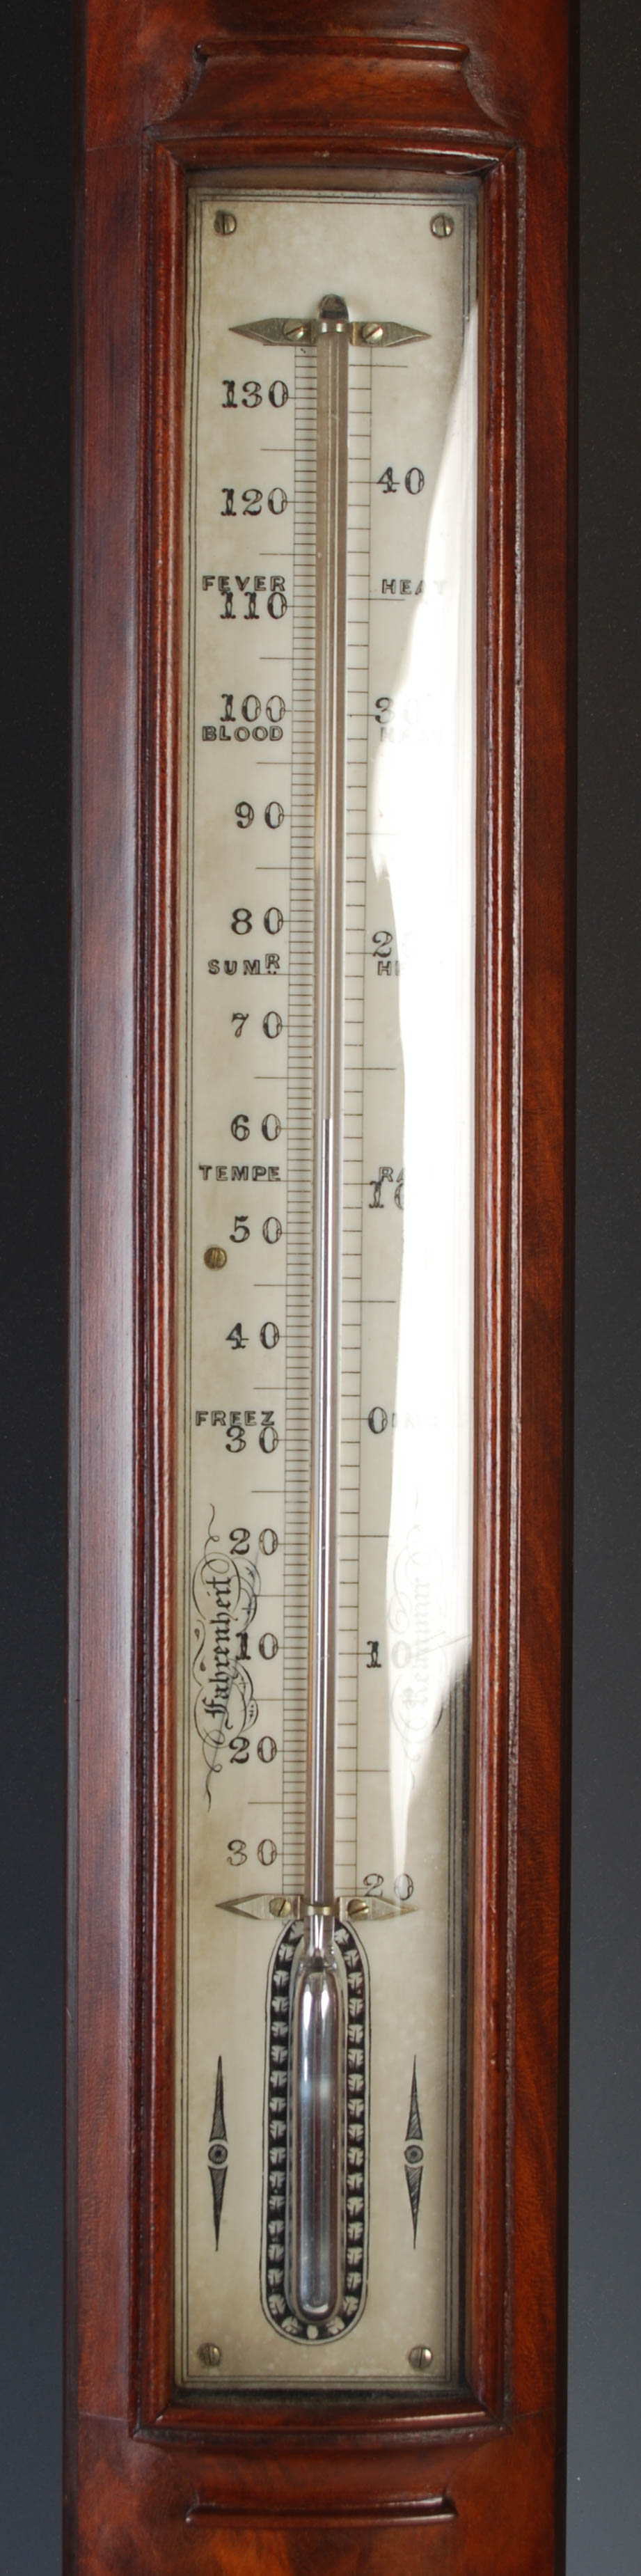 A 19th century mahogany and ebony lined stick barometer, MCGREGOR, GREENOCK & GLASGOW, with - Image 2 of 6